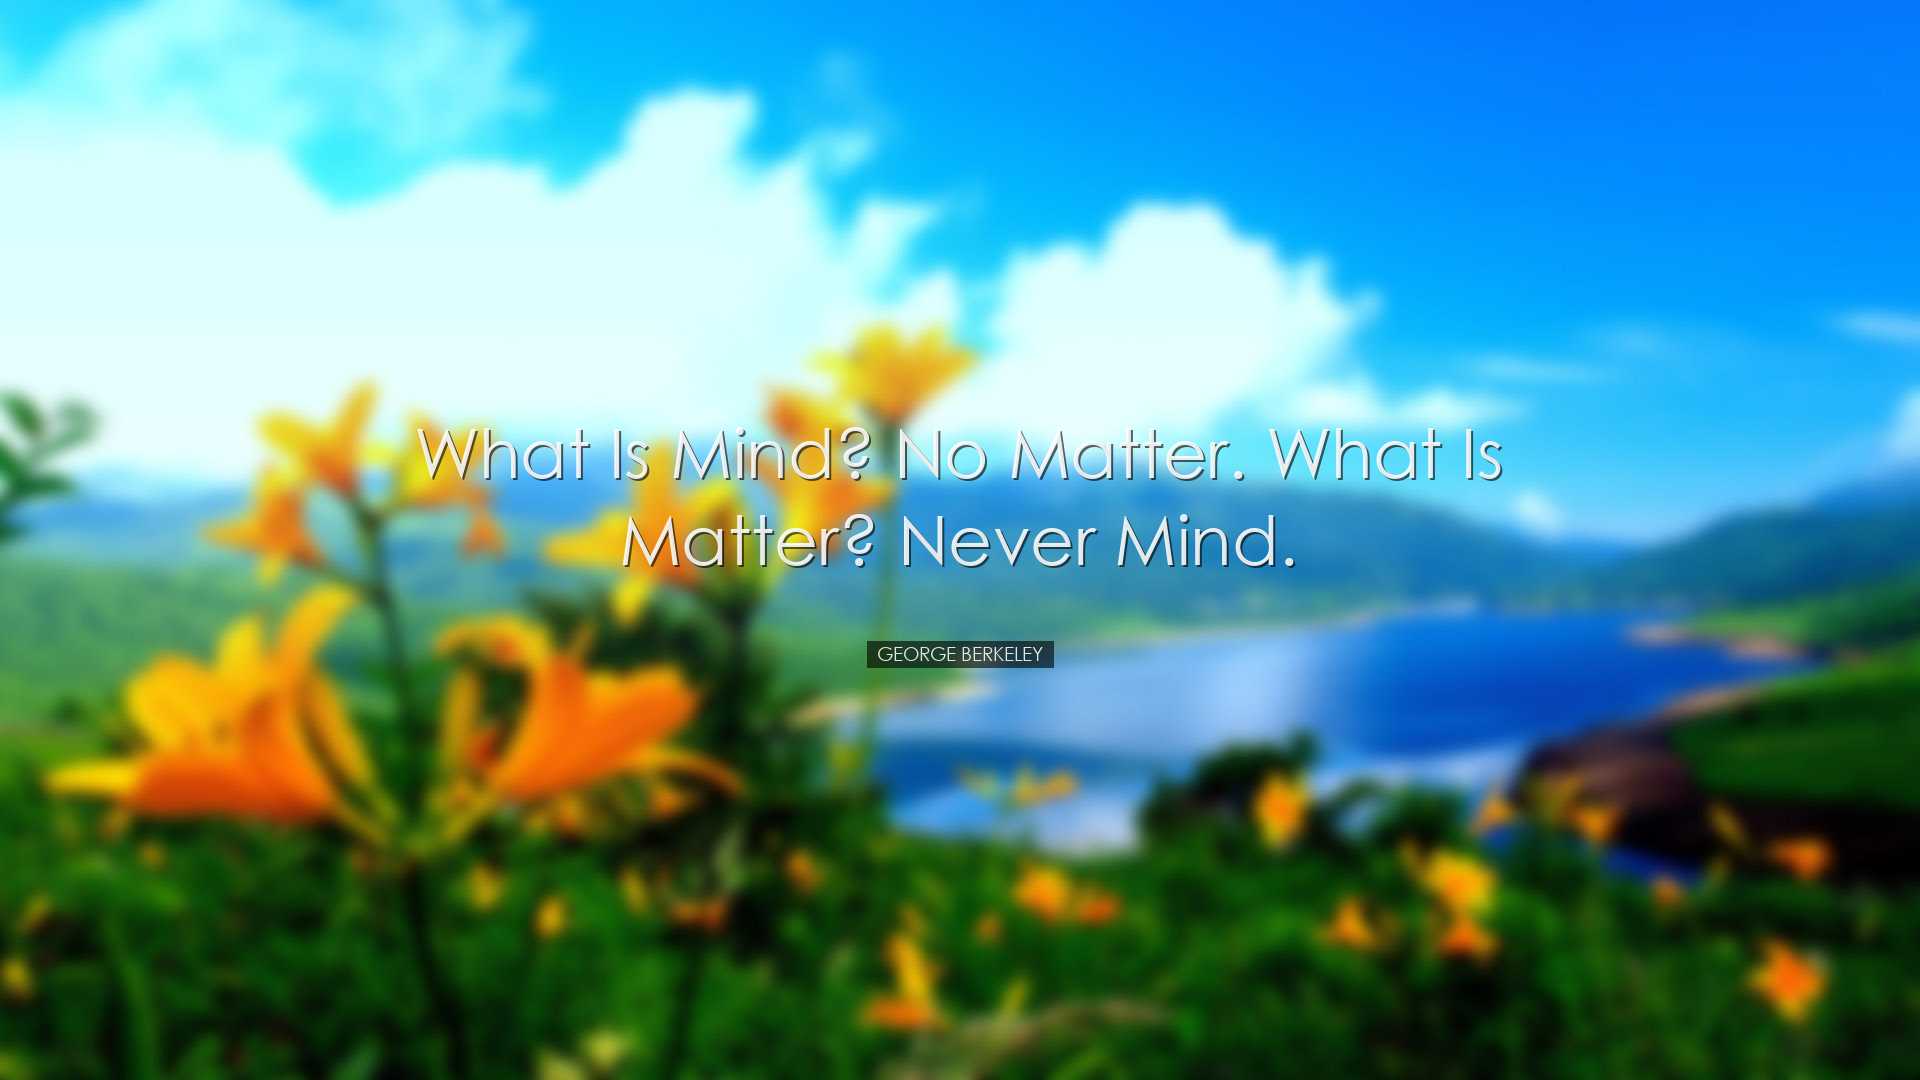 What is mind? No matter. What is matter? Never mind. - George Berk